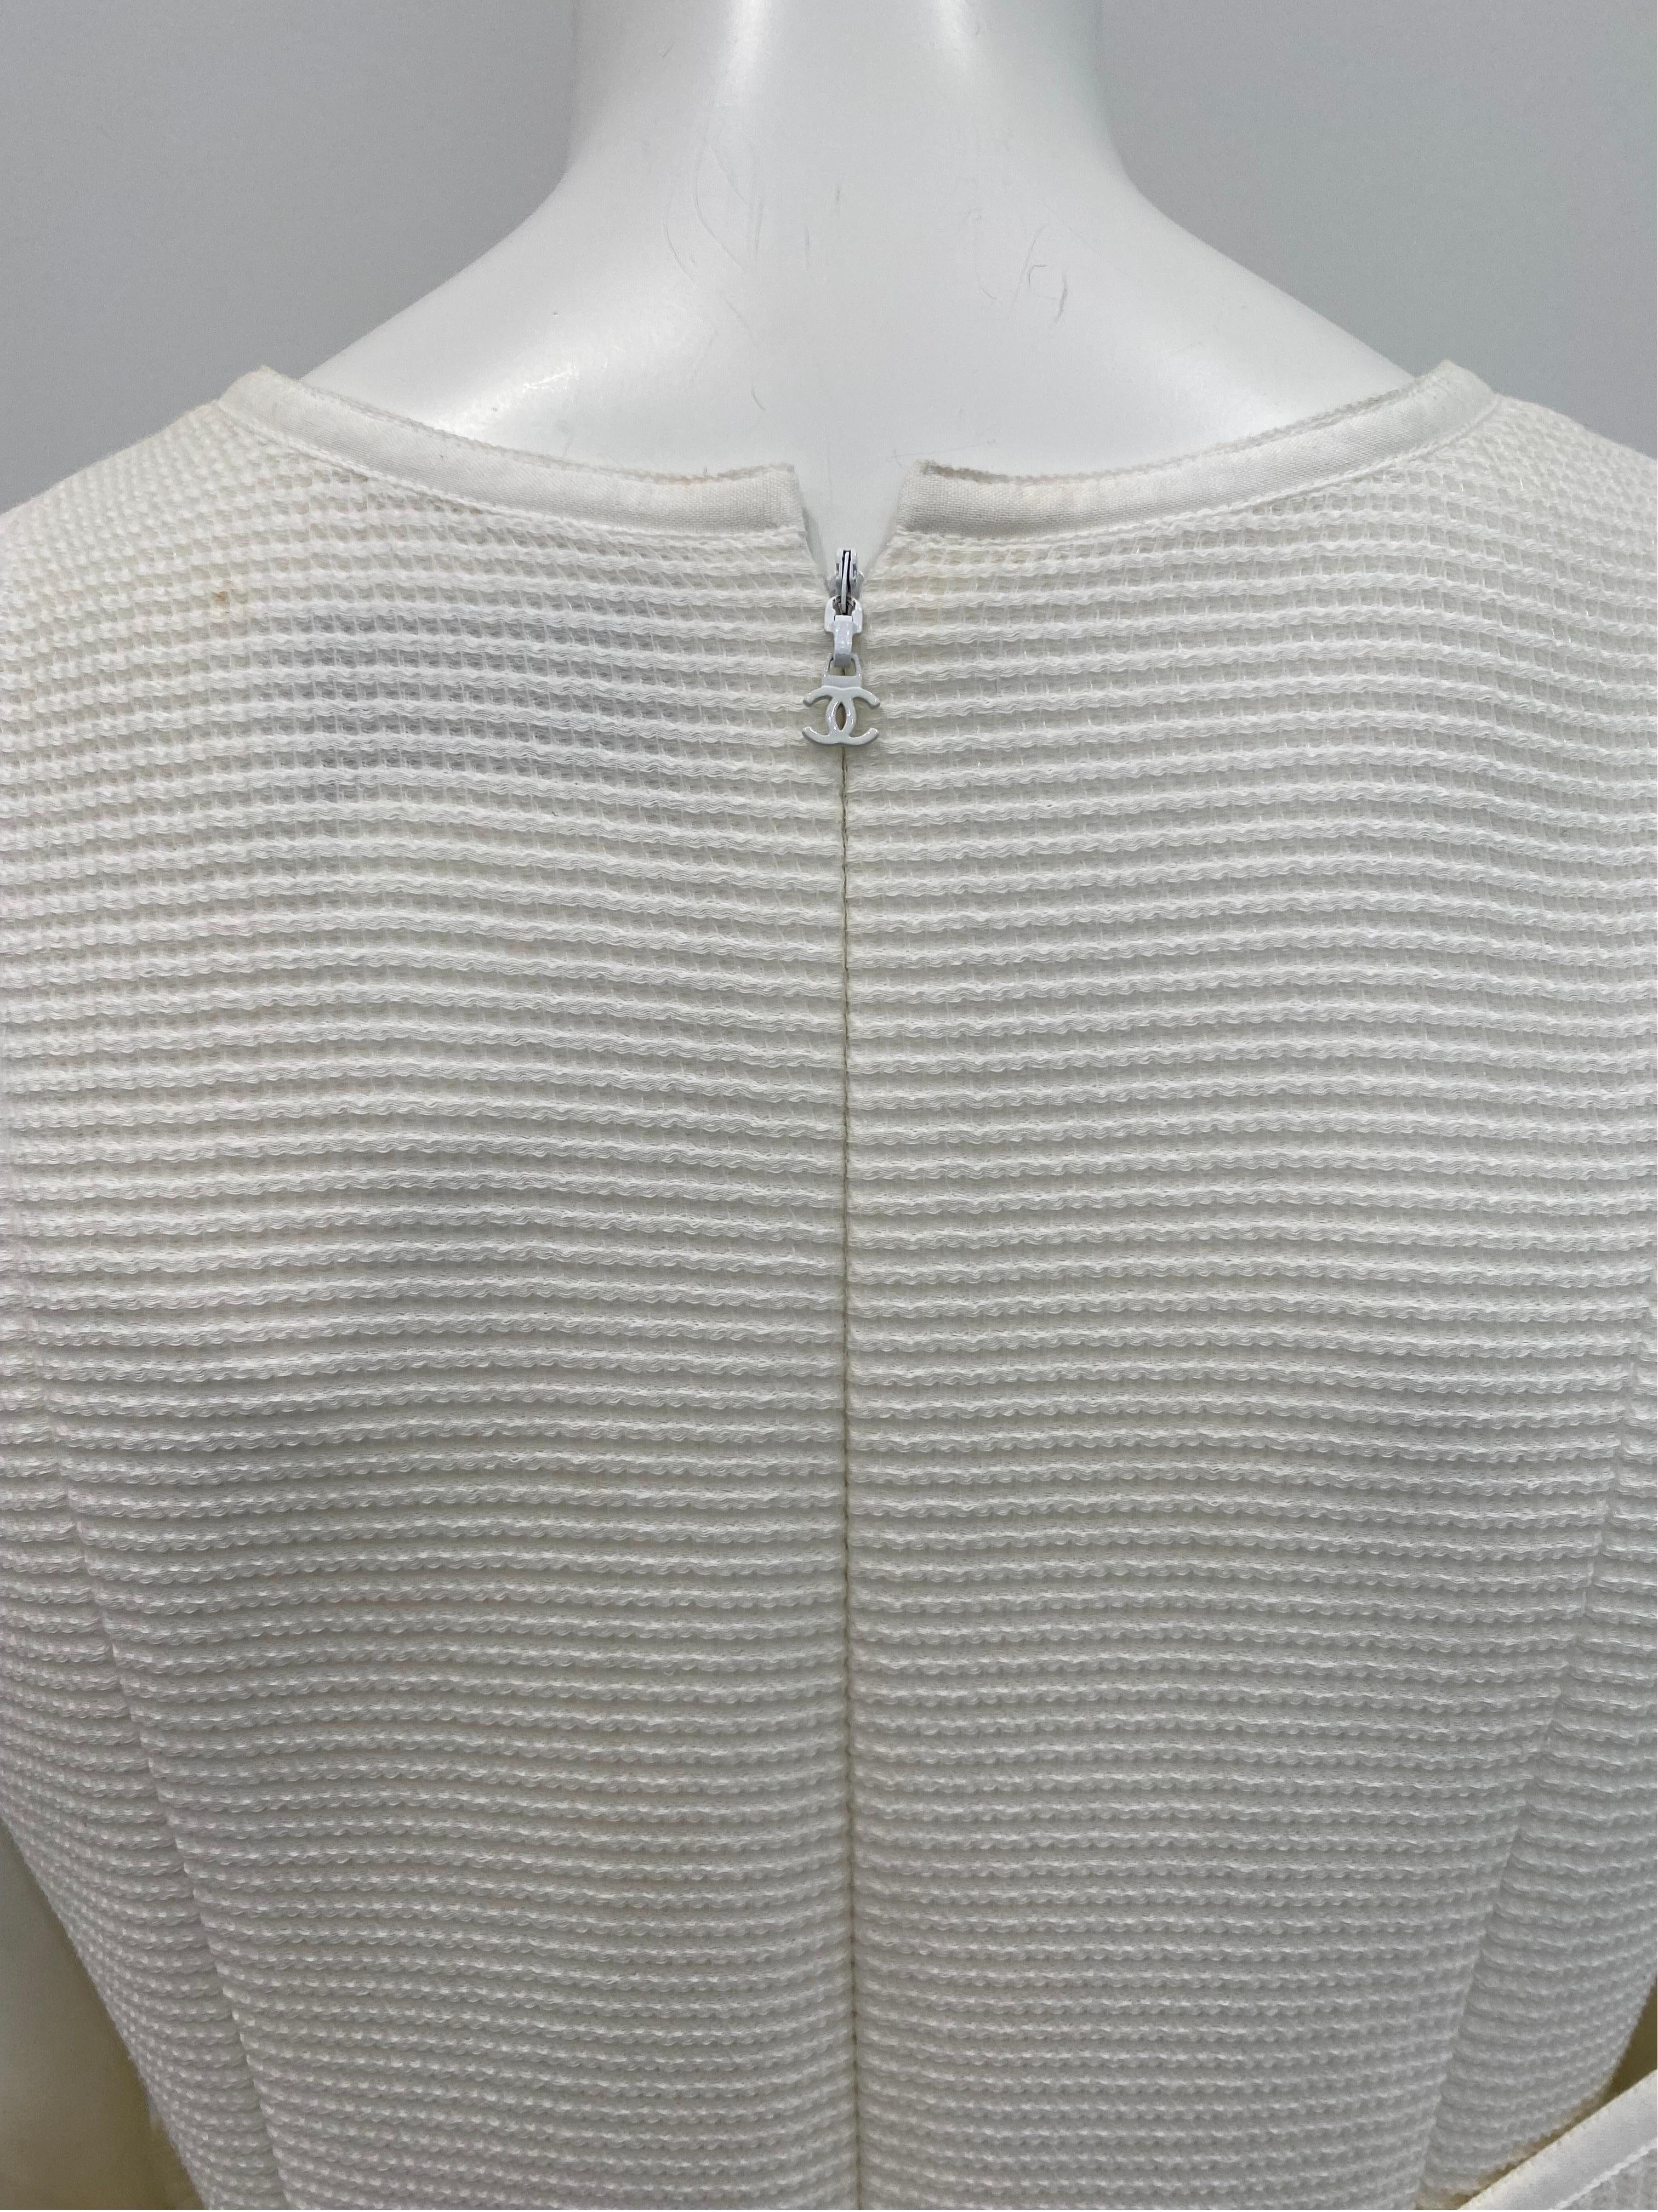 Chanel Ivory Ribbed Cotton Sleeveless Shift Dress with Jacket - Sz 42 For Sale 2